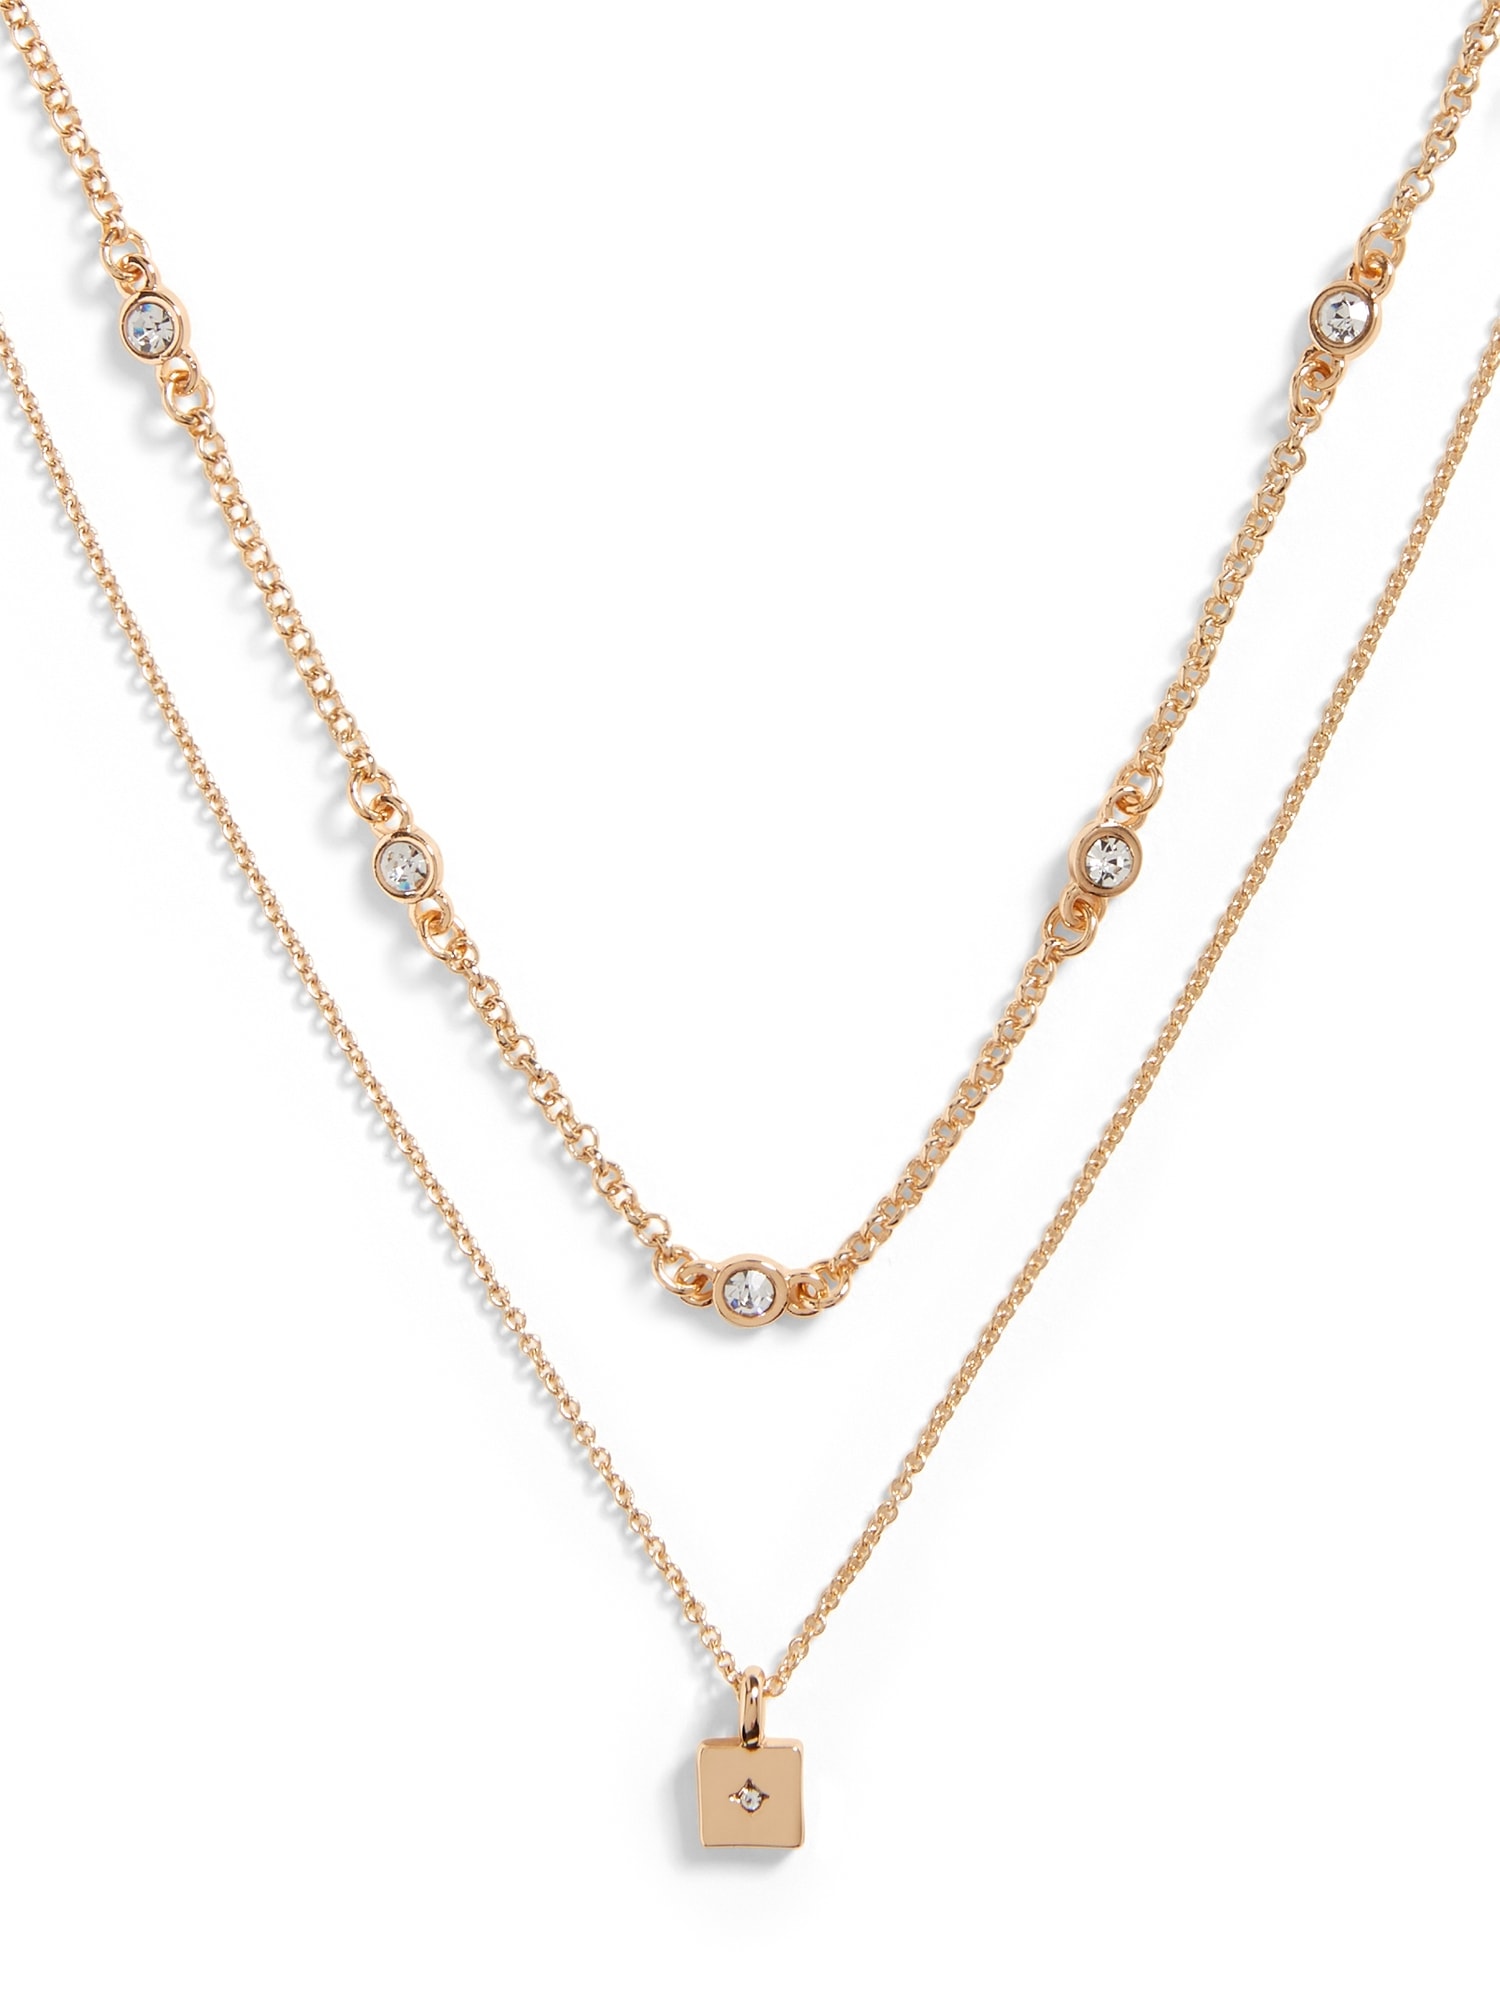 Almost Invisible Layered Necklace | Banana Republic